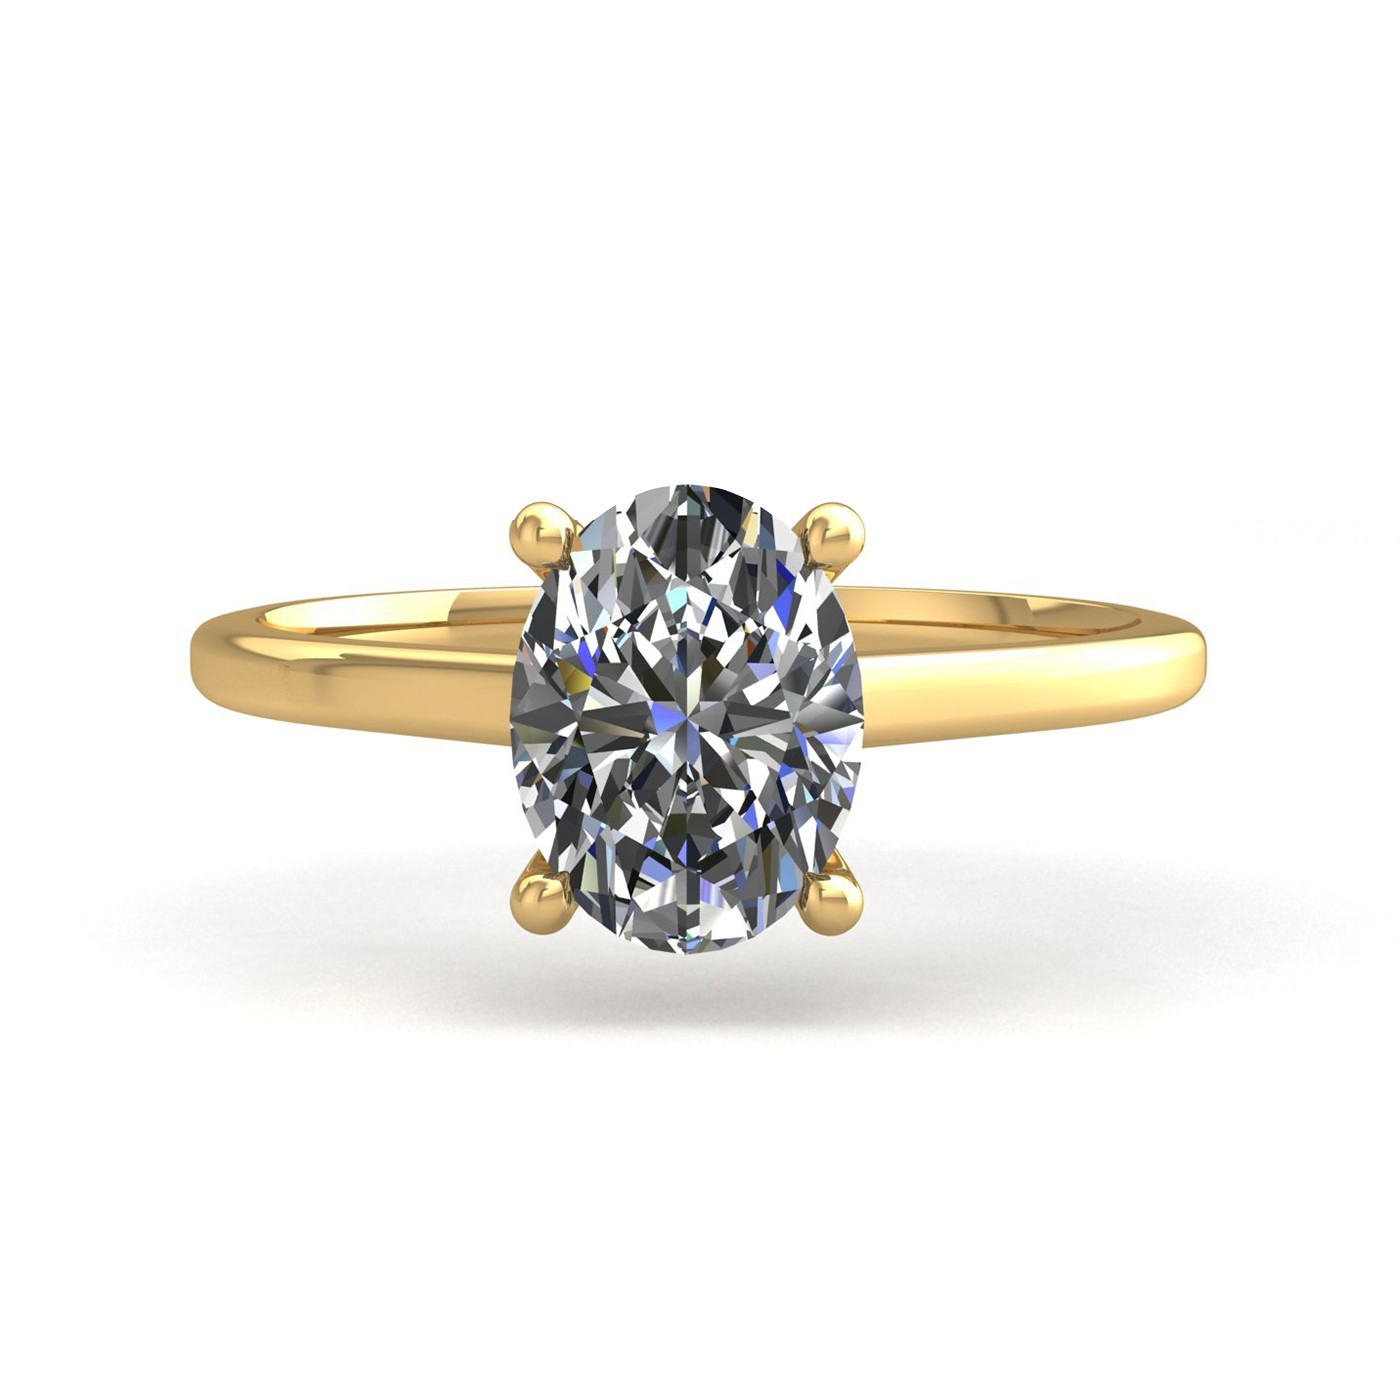 18k yellow gold  1,50 ct 4 prongs solitaire oval cut diamond engagement ring with whisper thin band Photos & images